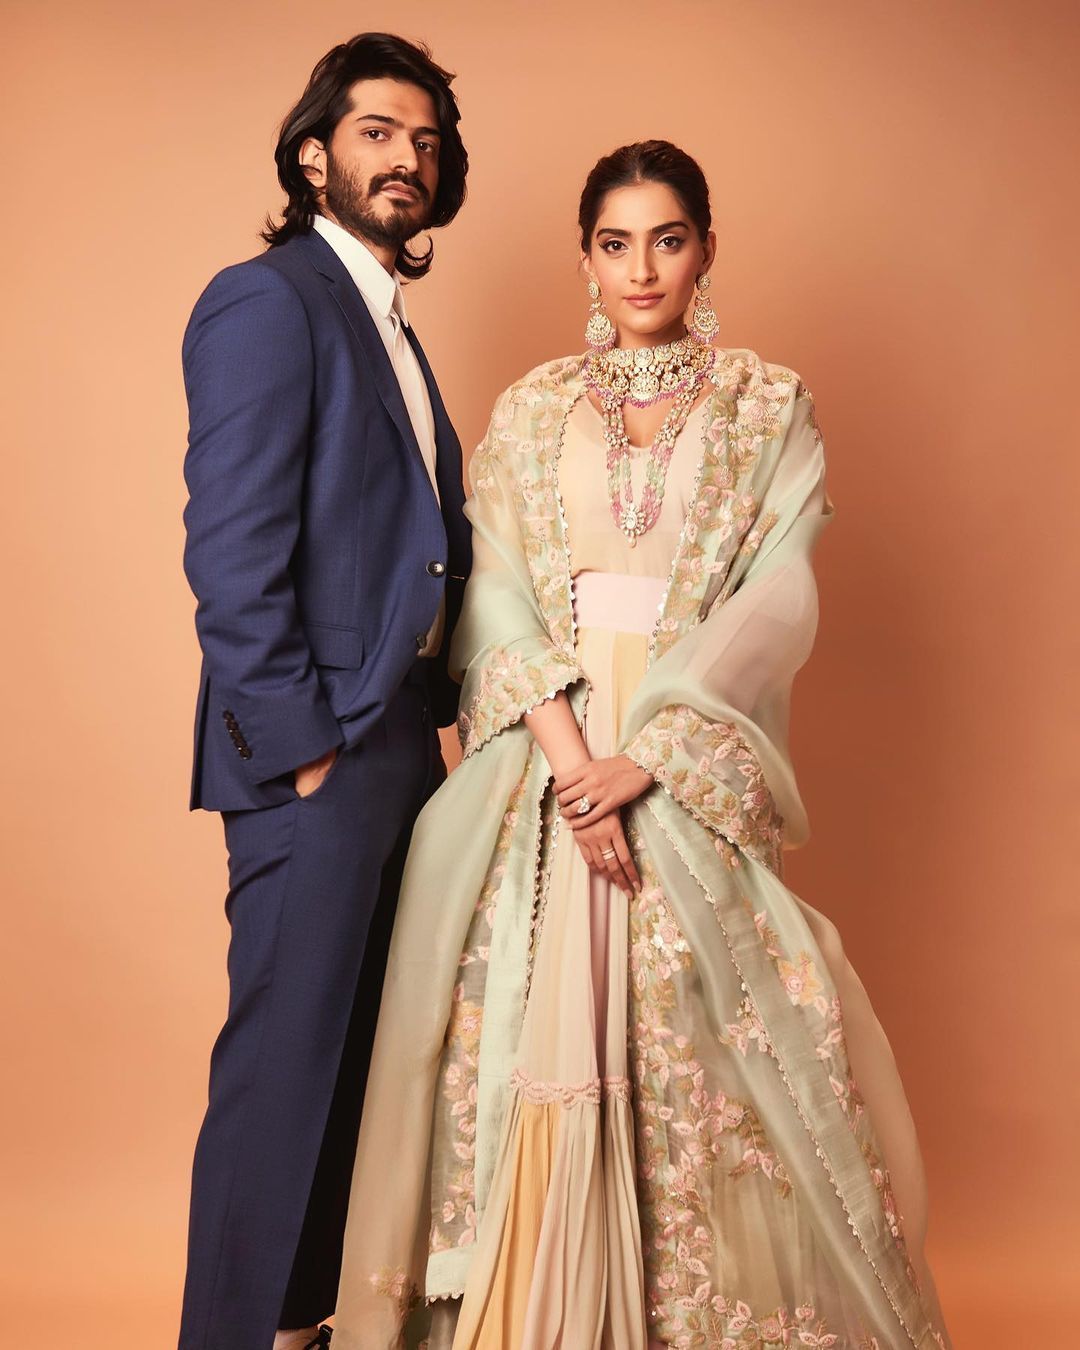 Sonam Kapoor Ahuja Showers Brother Harshvarrdhan Kapoor With Love On His Birthday; Calls Him The Apple Of Her Eye